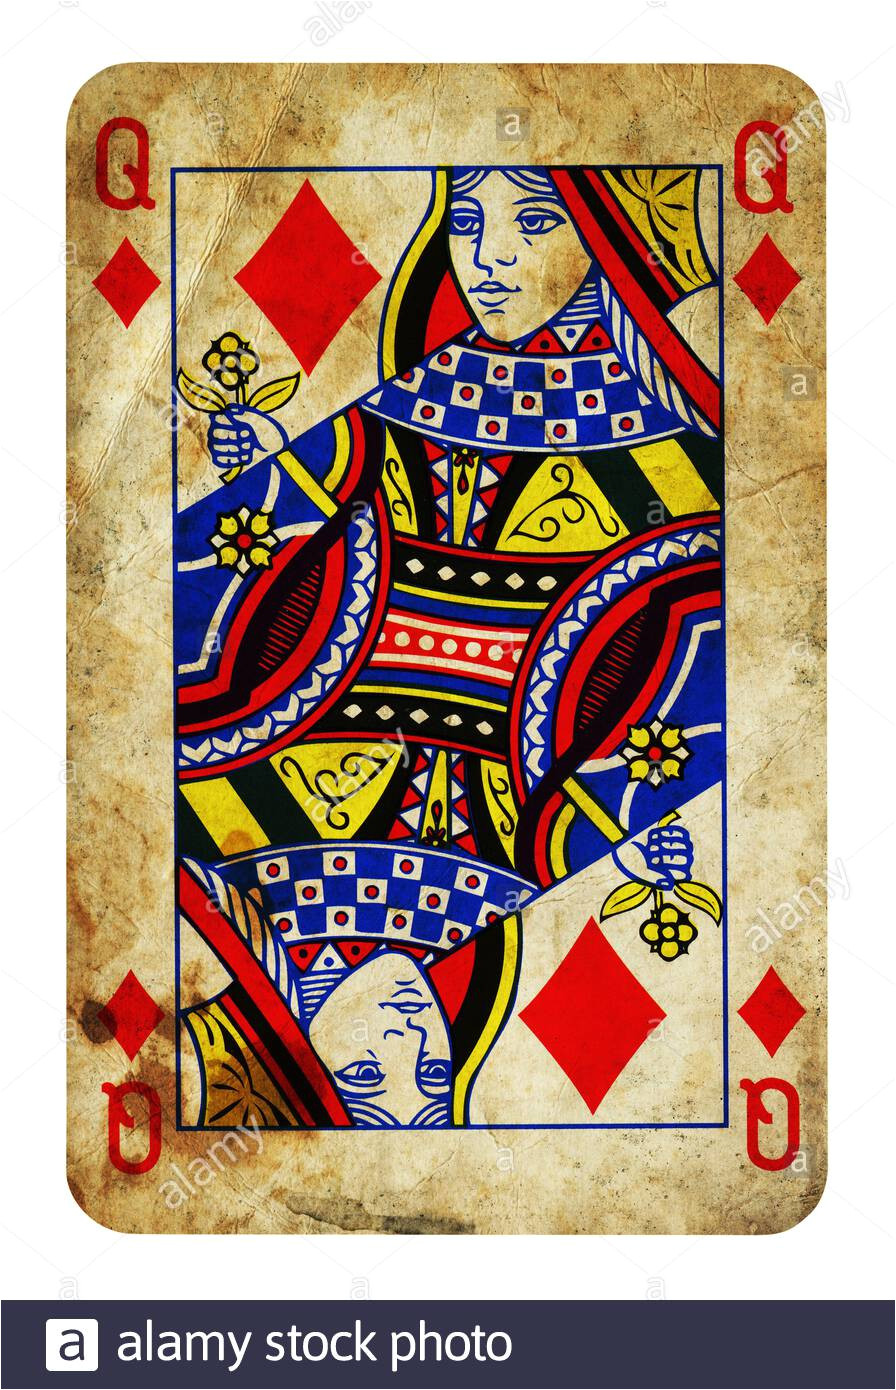 queen of diamonds vintage playing card isolated on white clipping path included 2arb3c6 jpg